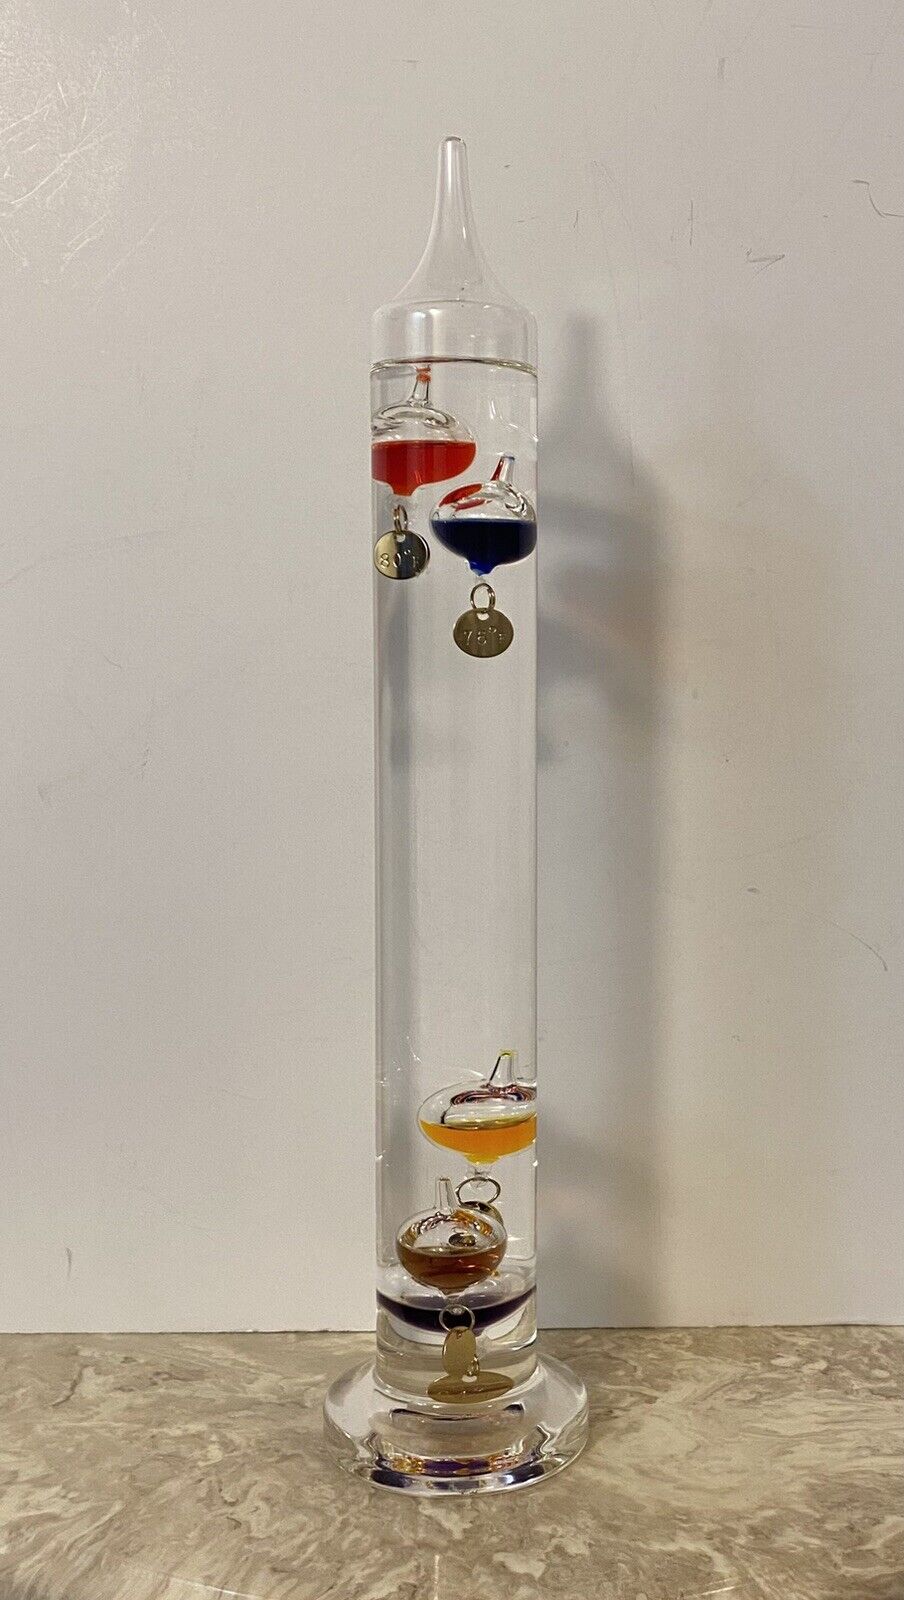 Thermometer Glass Galileo Multi Color Floating Orbs Home Decor 14.5” Tall